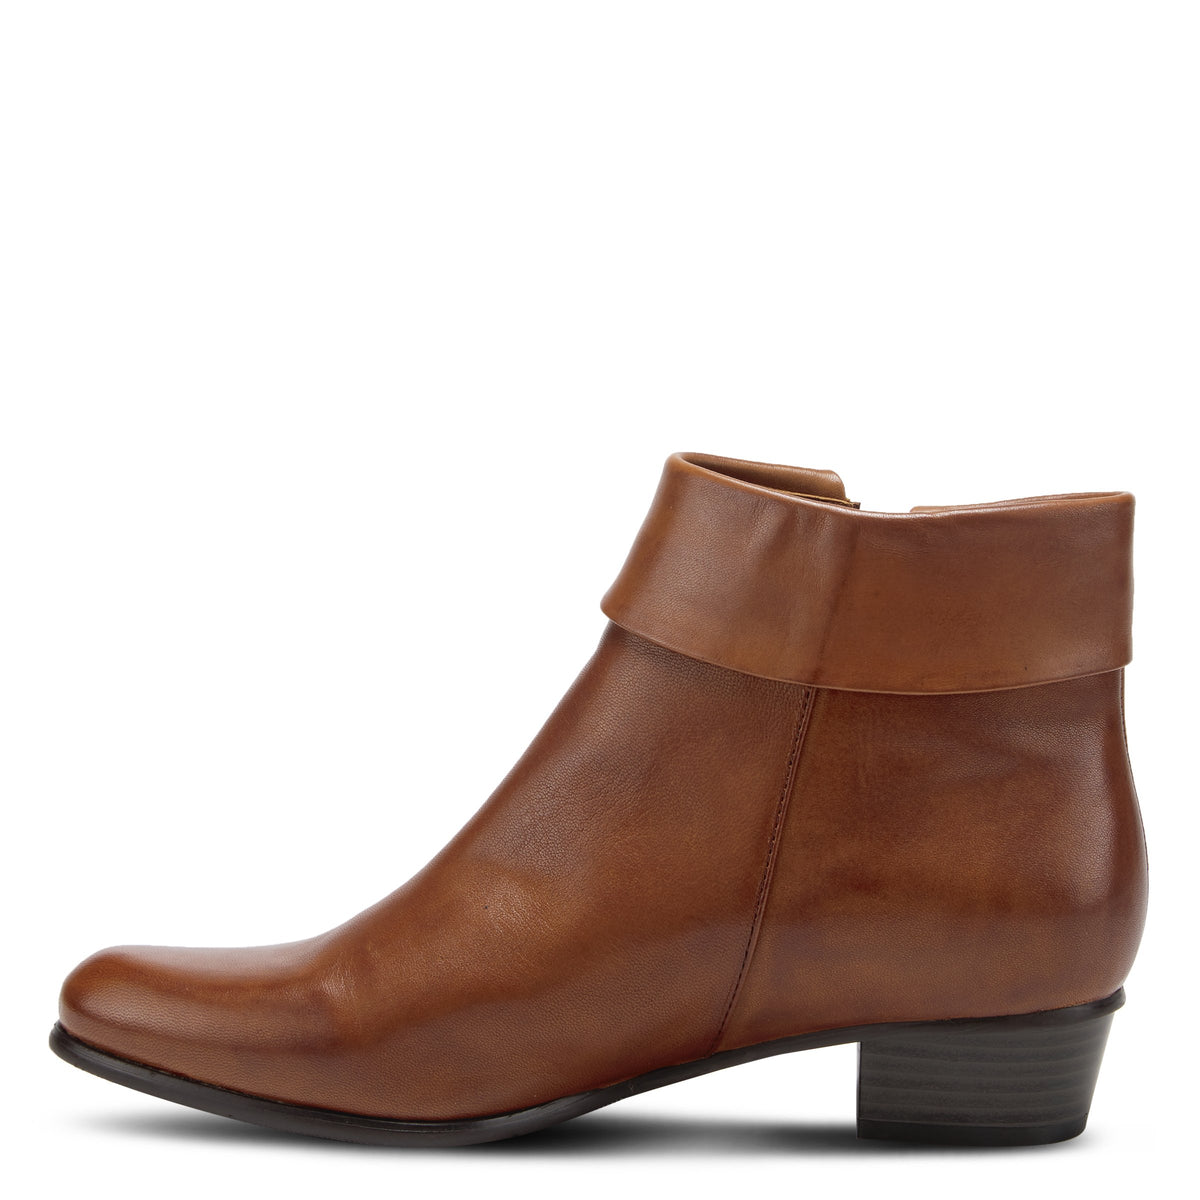 STOCKHOLM BOOTIE by SPRING STEP 